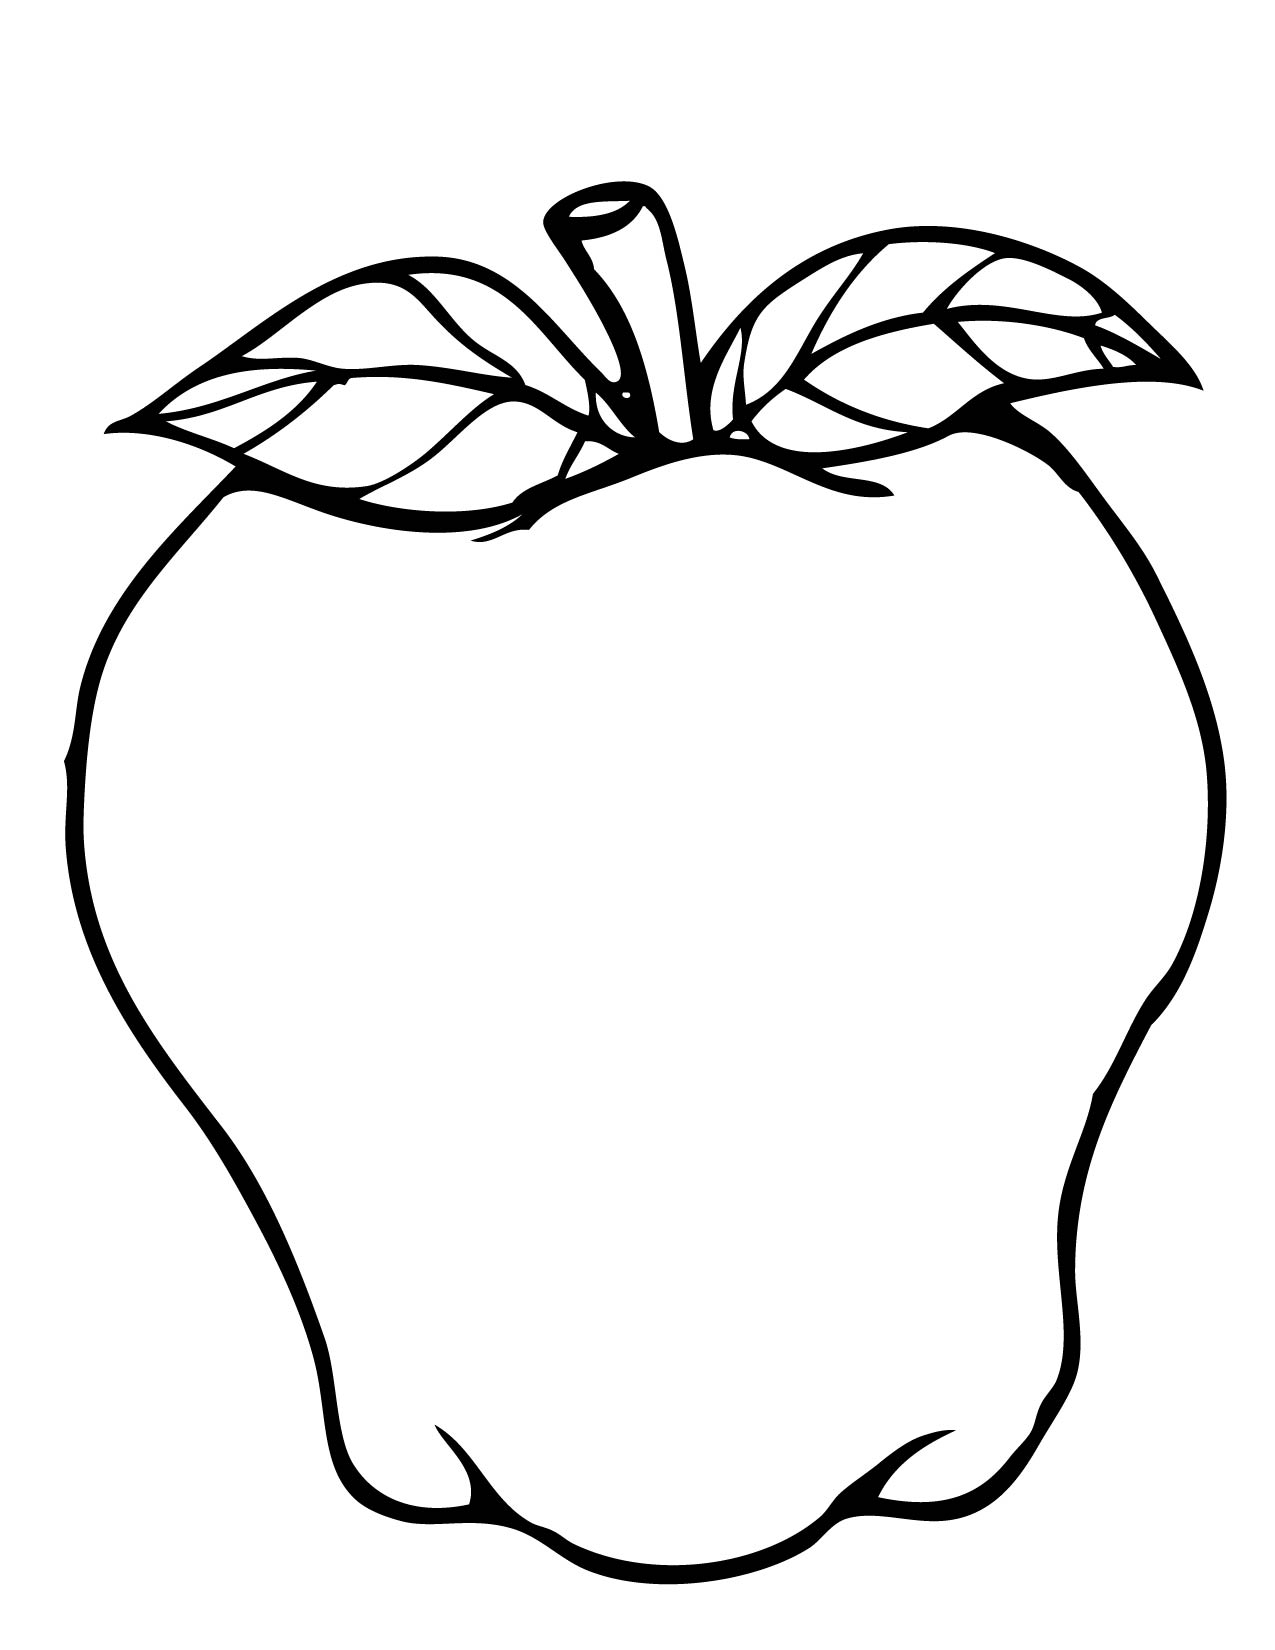 Apple Tree Coloring Page | Coloring Page